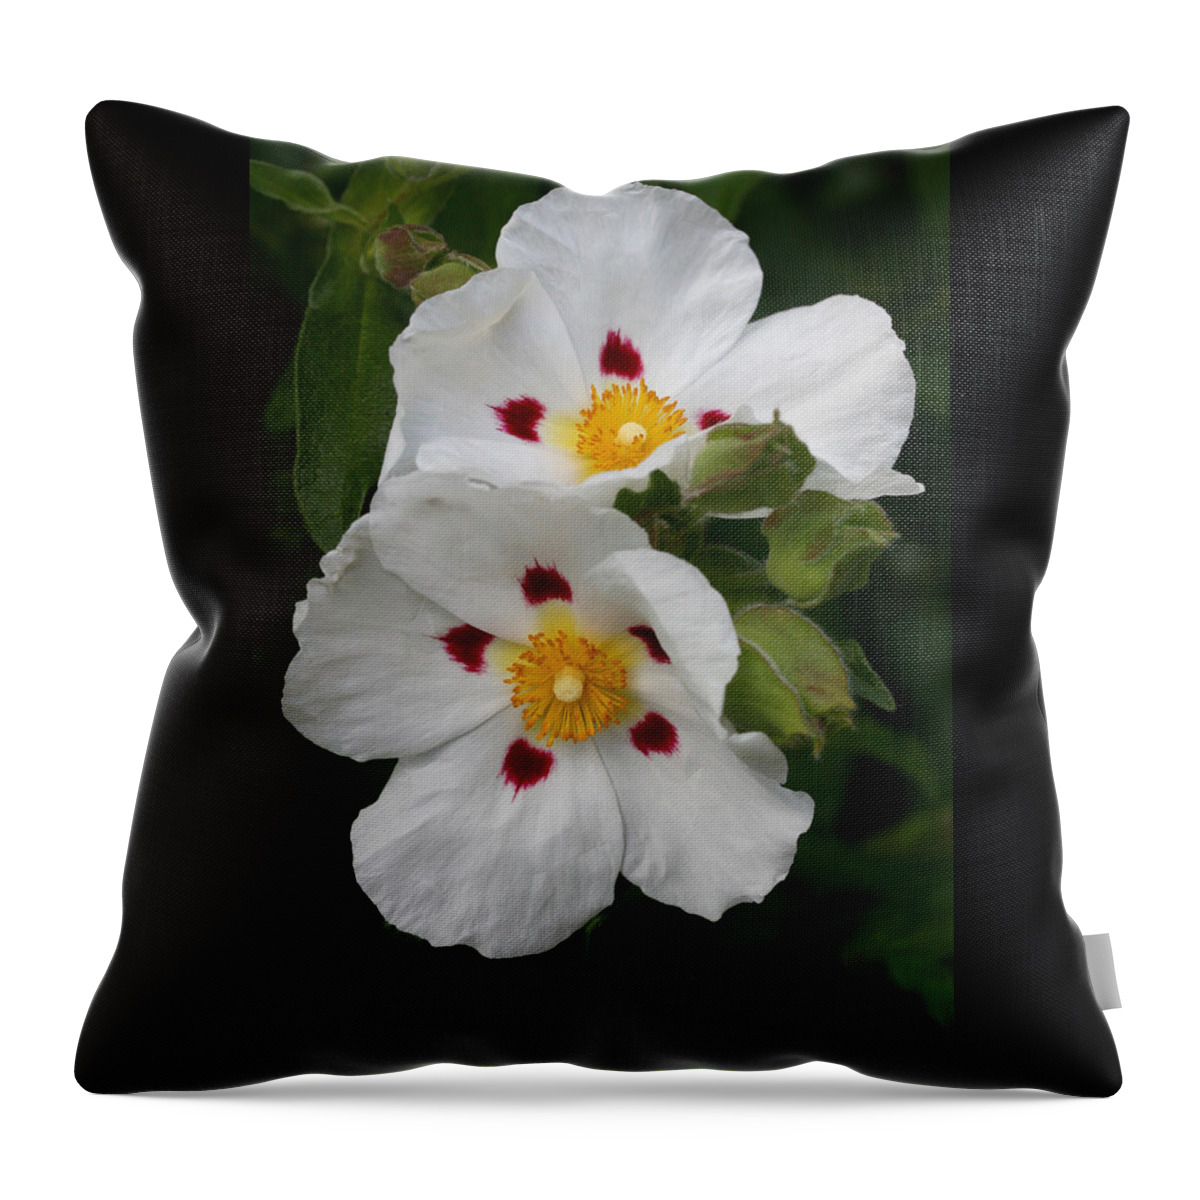 Botanical Throw Pillow featuring the photograph Painted Crepe by Tammy Pool